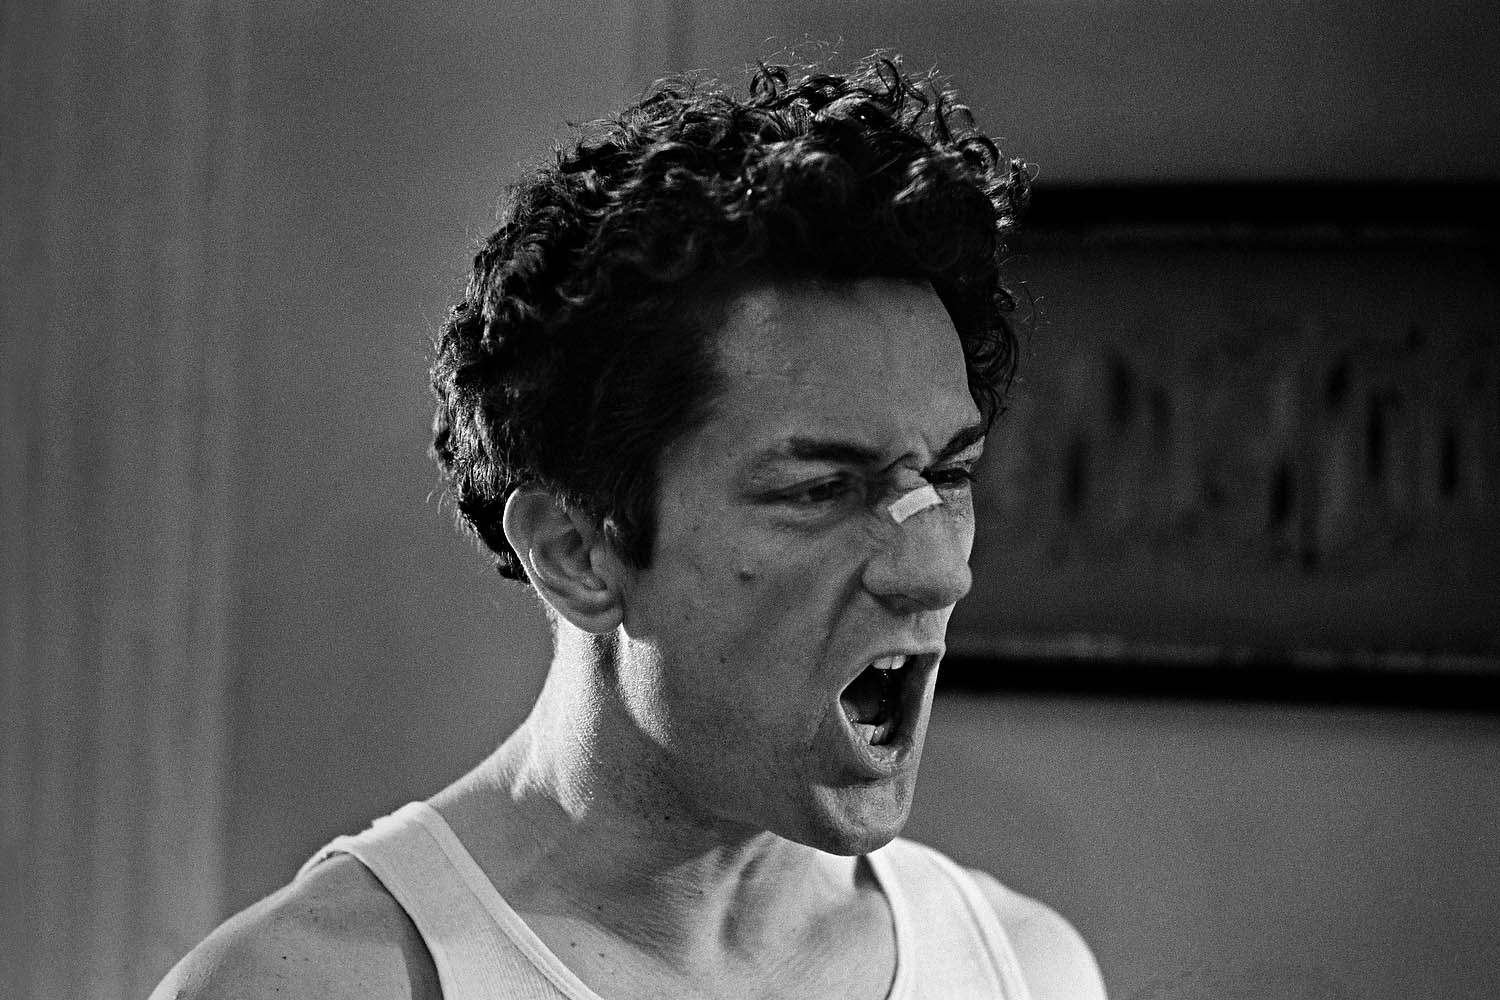 The following photographs were taken in New York in 1979.De Niro, as LaMotta, screams aggressively, accusing his brother of sleeping with his wife.